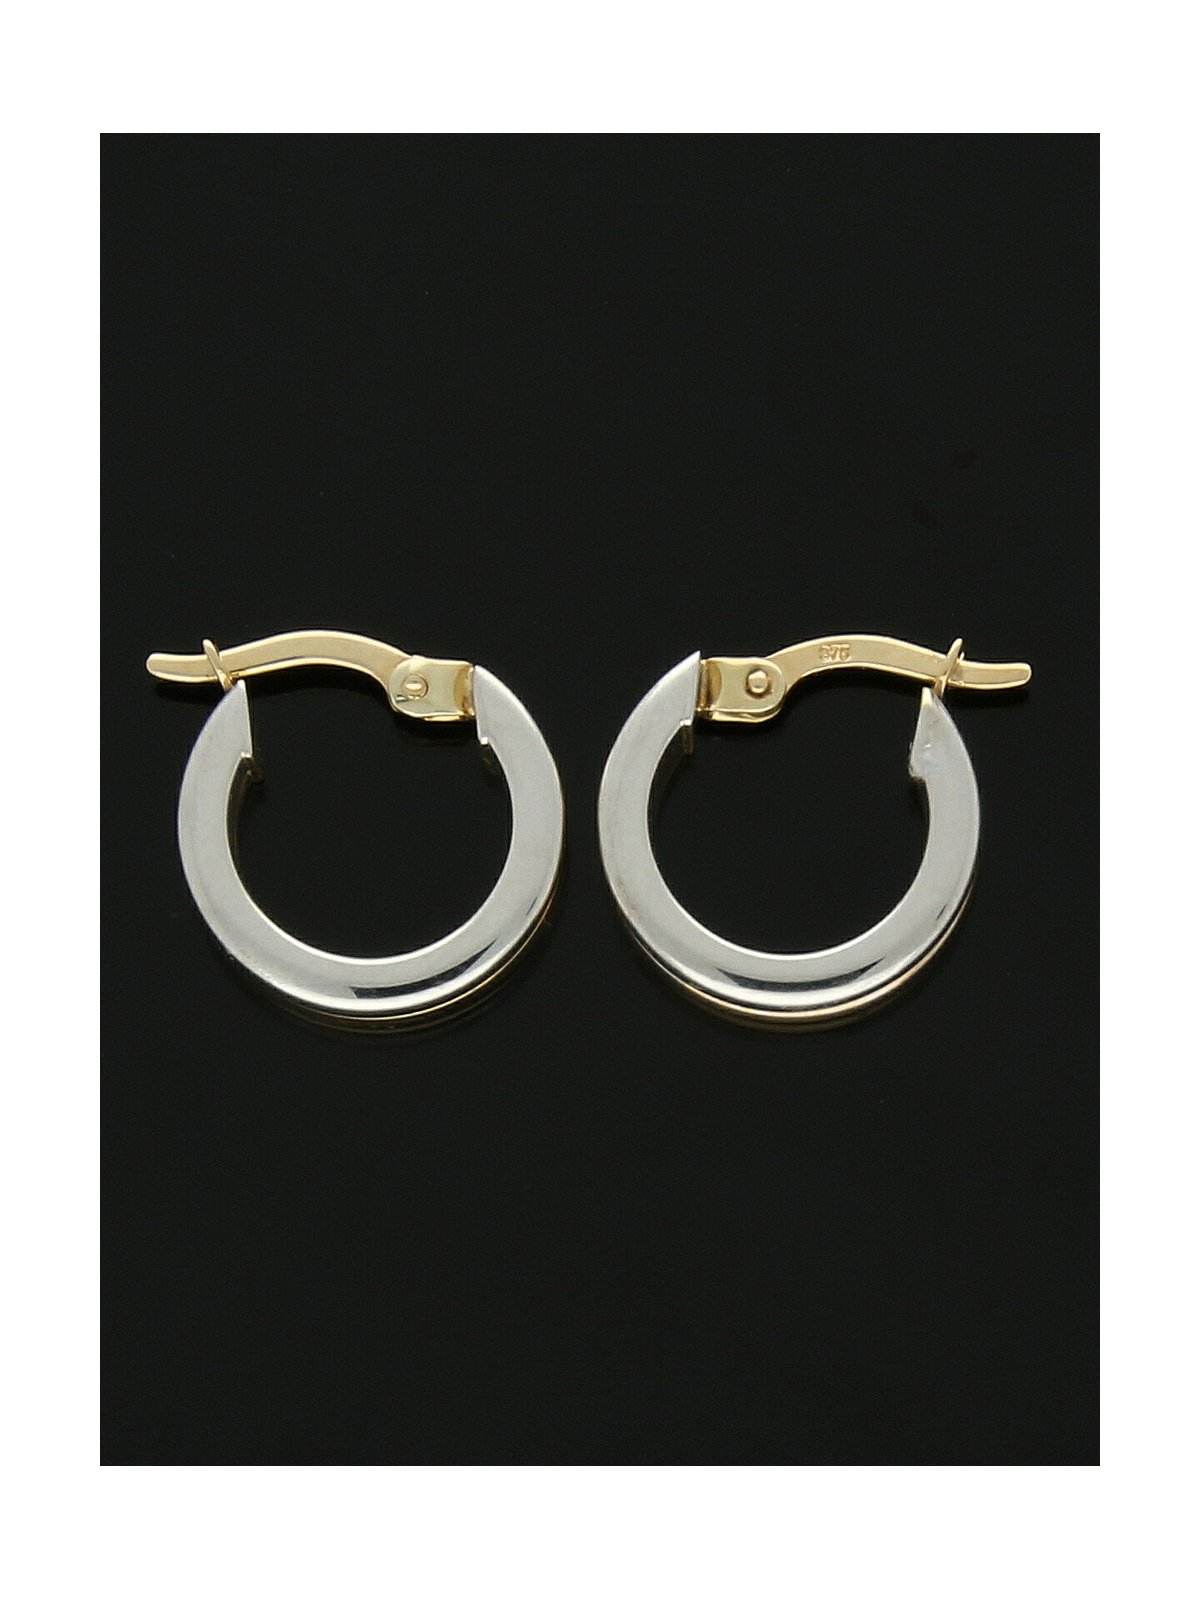 Two Row Hoop Earrings 14mm in 9ct Yellow & White Gold